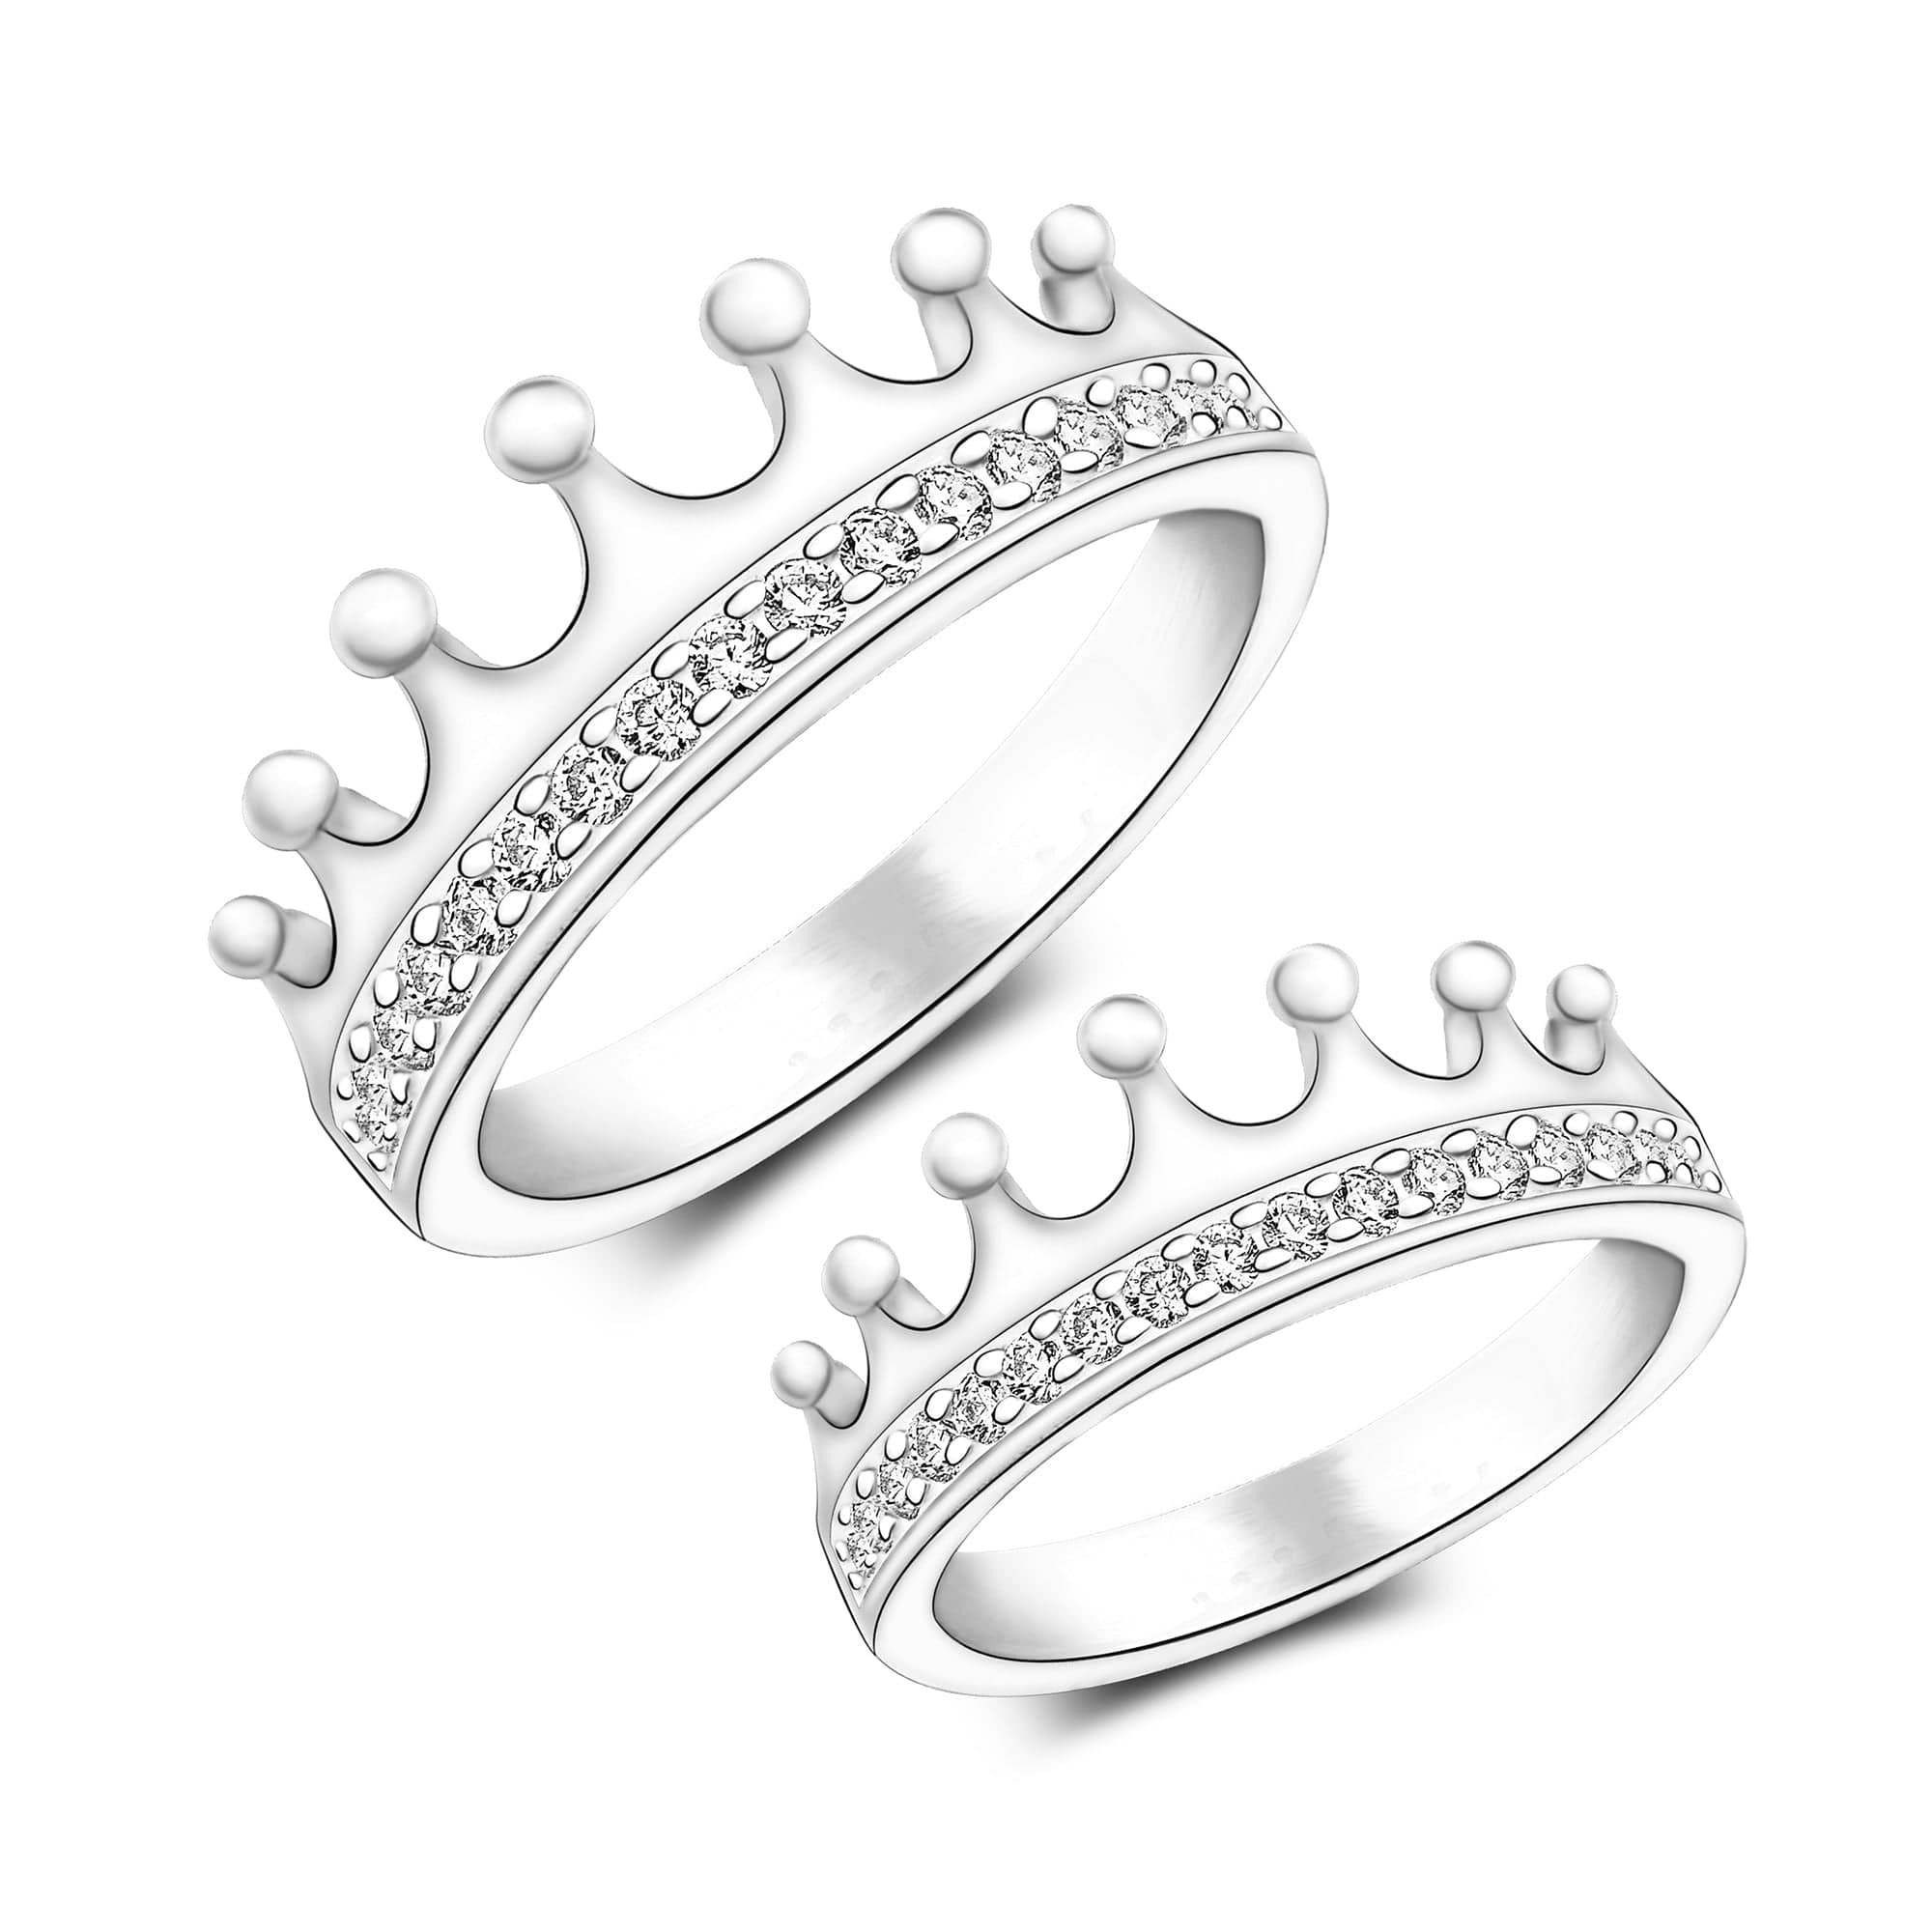 ME&YOU Romantic Beautiful Adjustable King and Queen Couple Rings  IZ19Ringcouple3-004 Stainless Steel Silver Plated Ring Set Price in India -  Buy ME&YOU Romantic Beautiful Adjustable King and Queen Couple Rings  IZ19Ringcouple3-004 Stainless